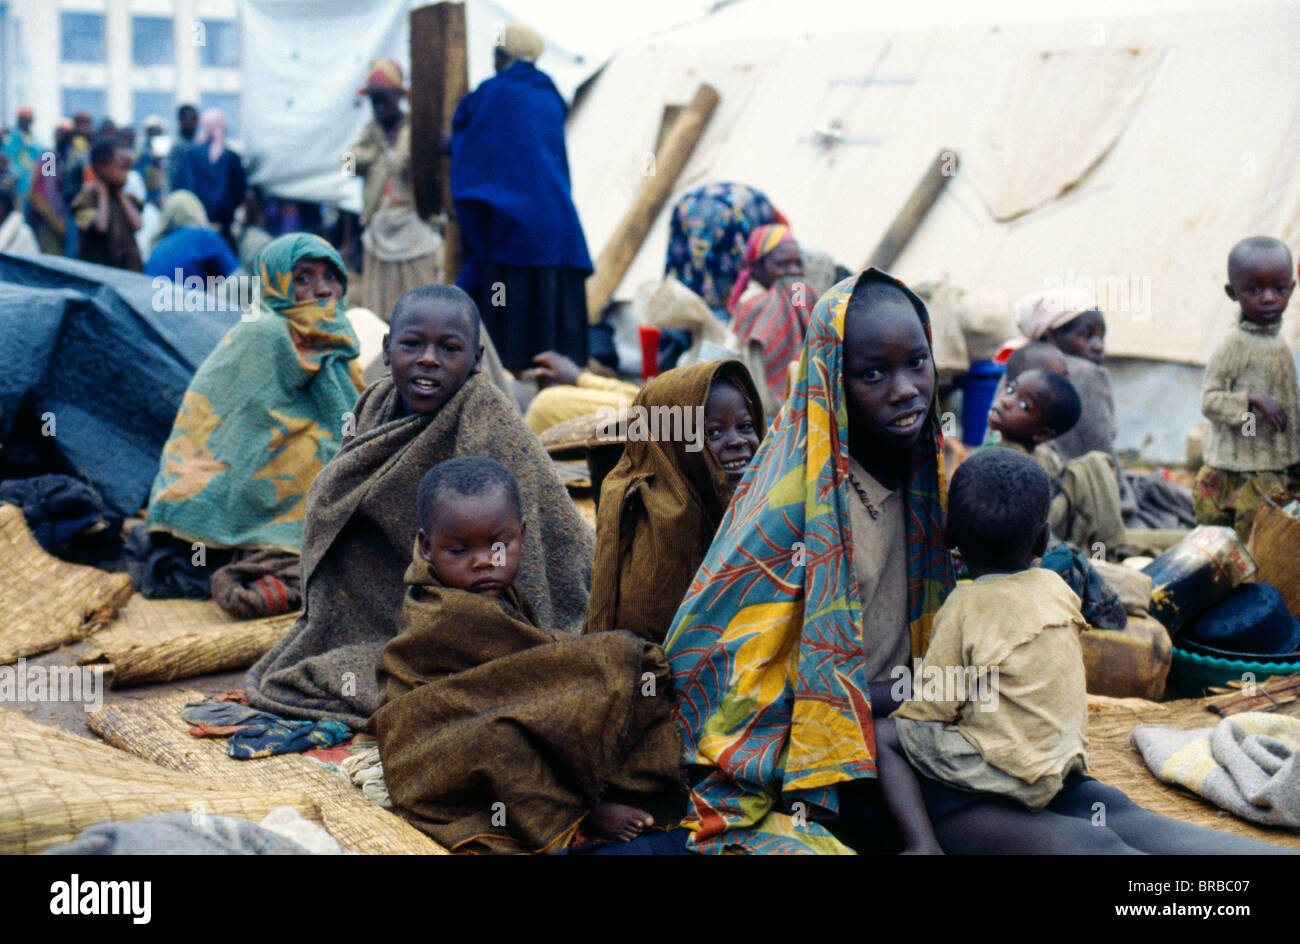 Congo Central Africa Bukavu Rwandan Refugees Wrapped In Blankets Without Shelter Stock Photo